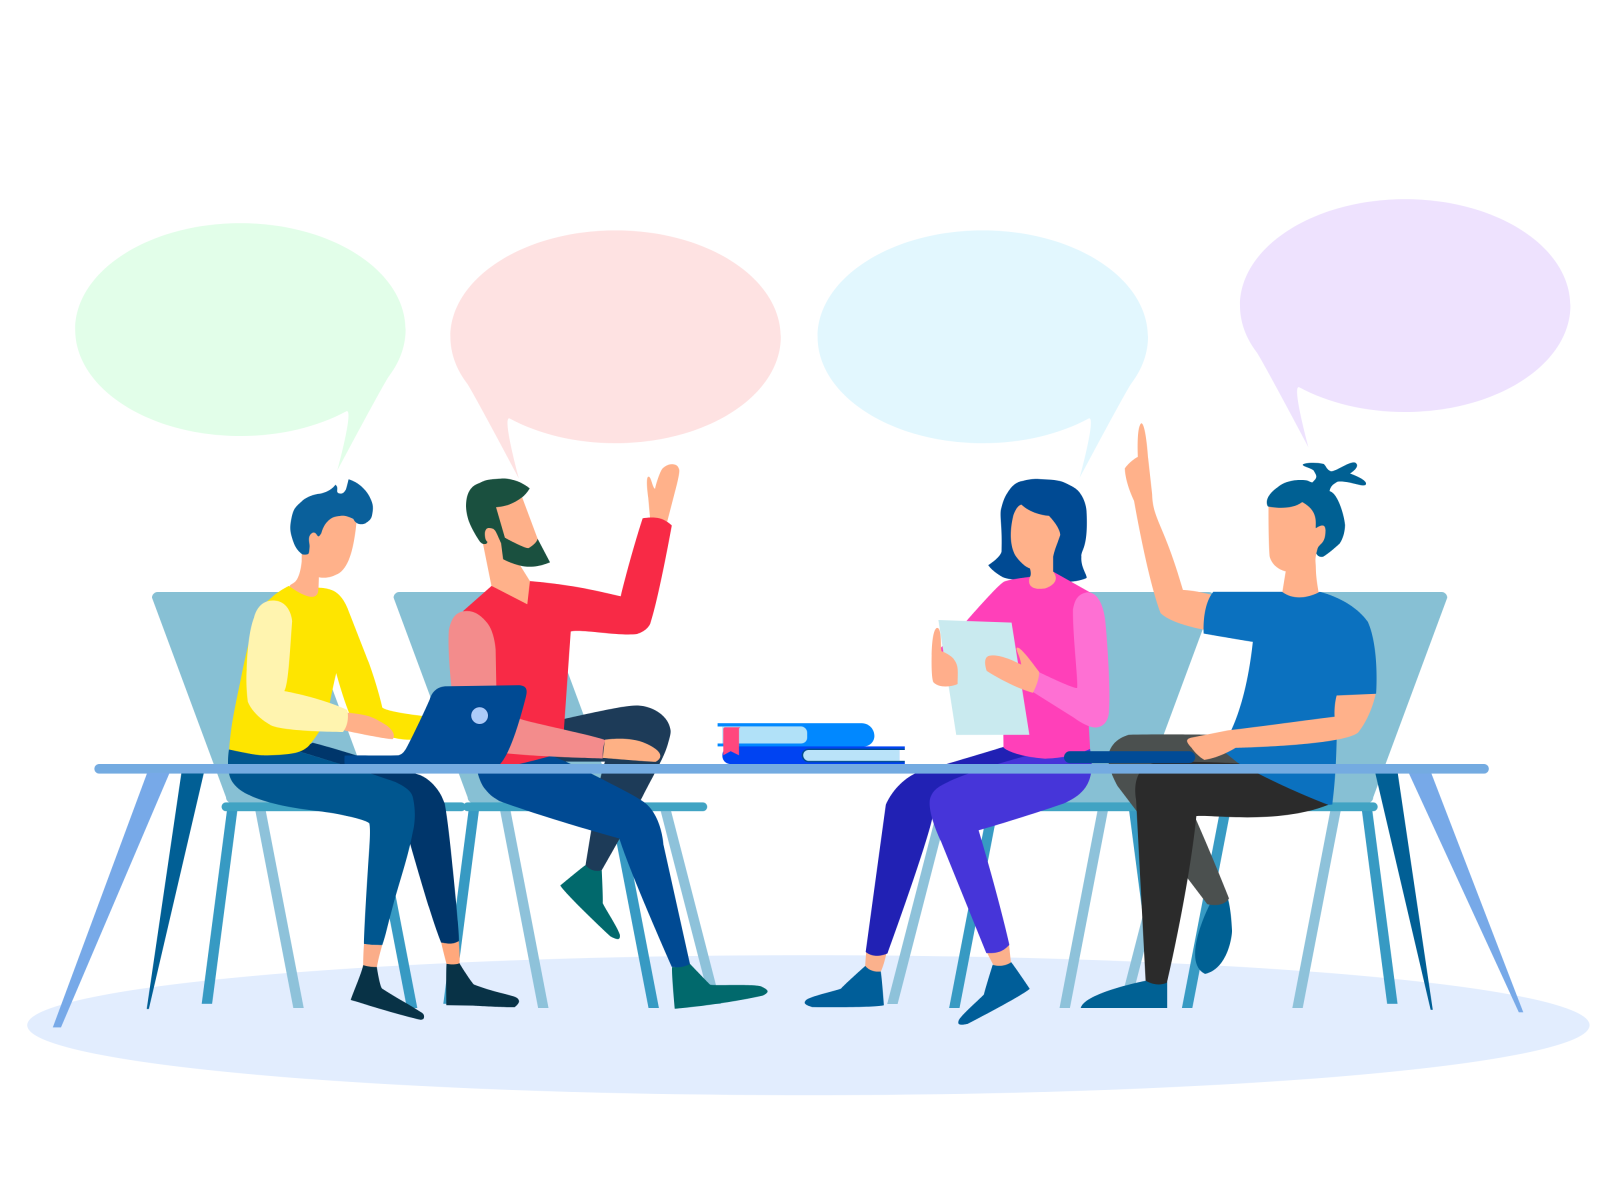 Group Meetings \u0026 Discussion by Sundhar on Dribbble